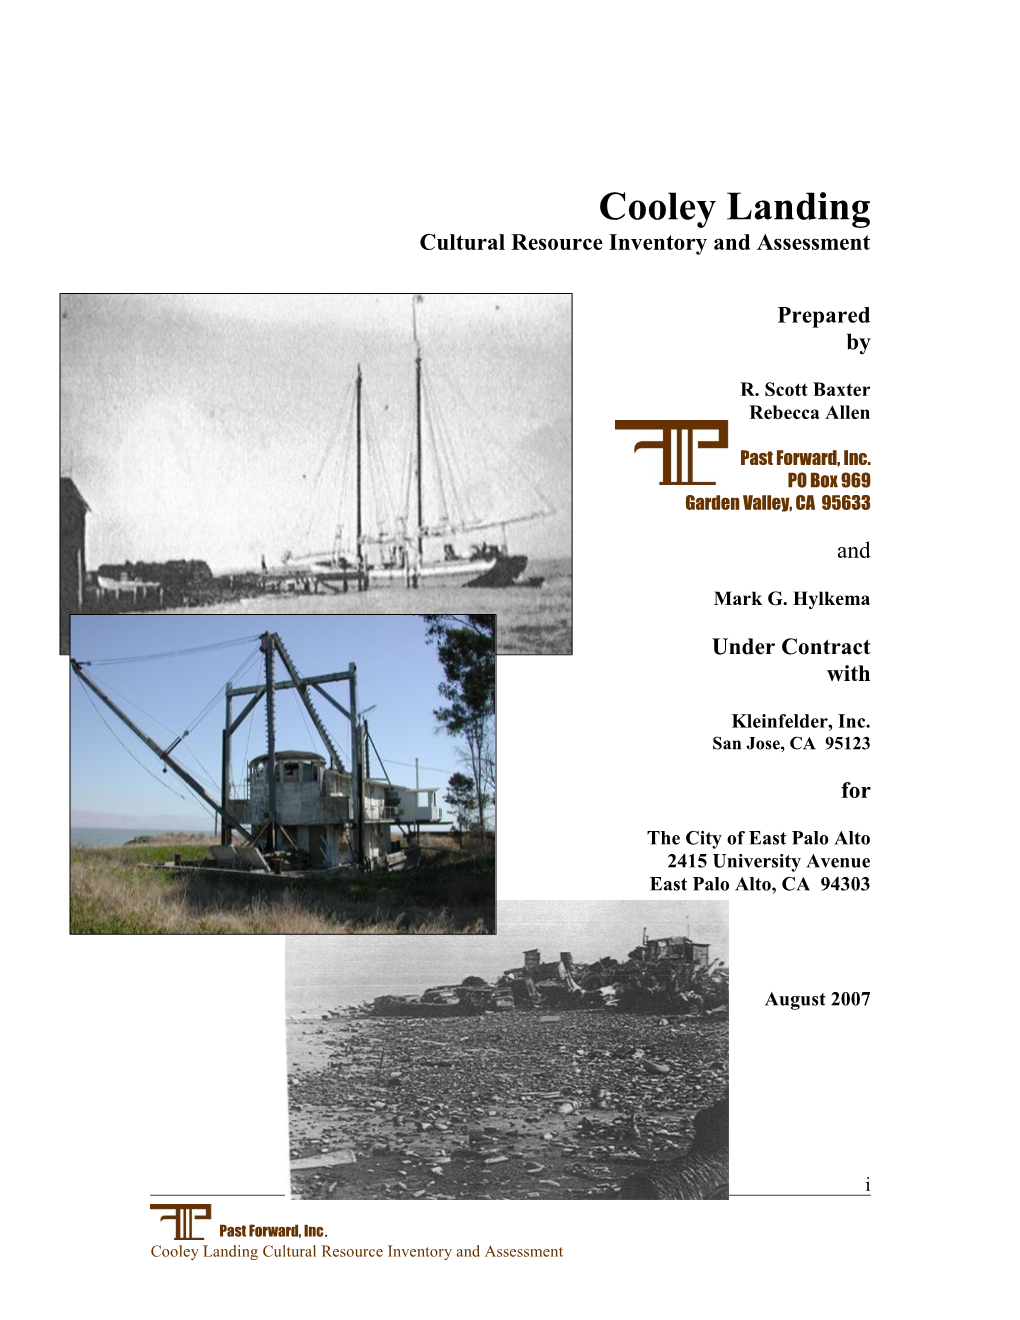 Cooley Landing Cultural Resource Inventory and Assessment